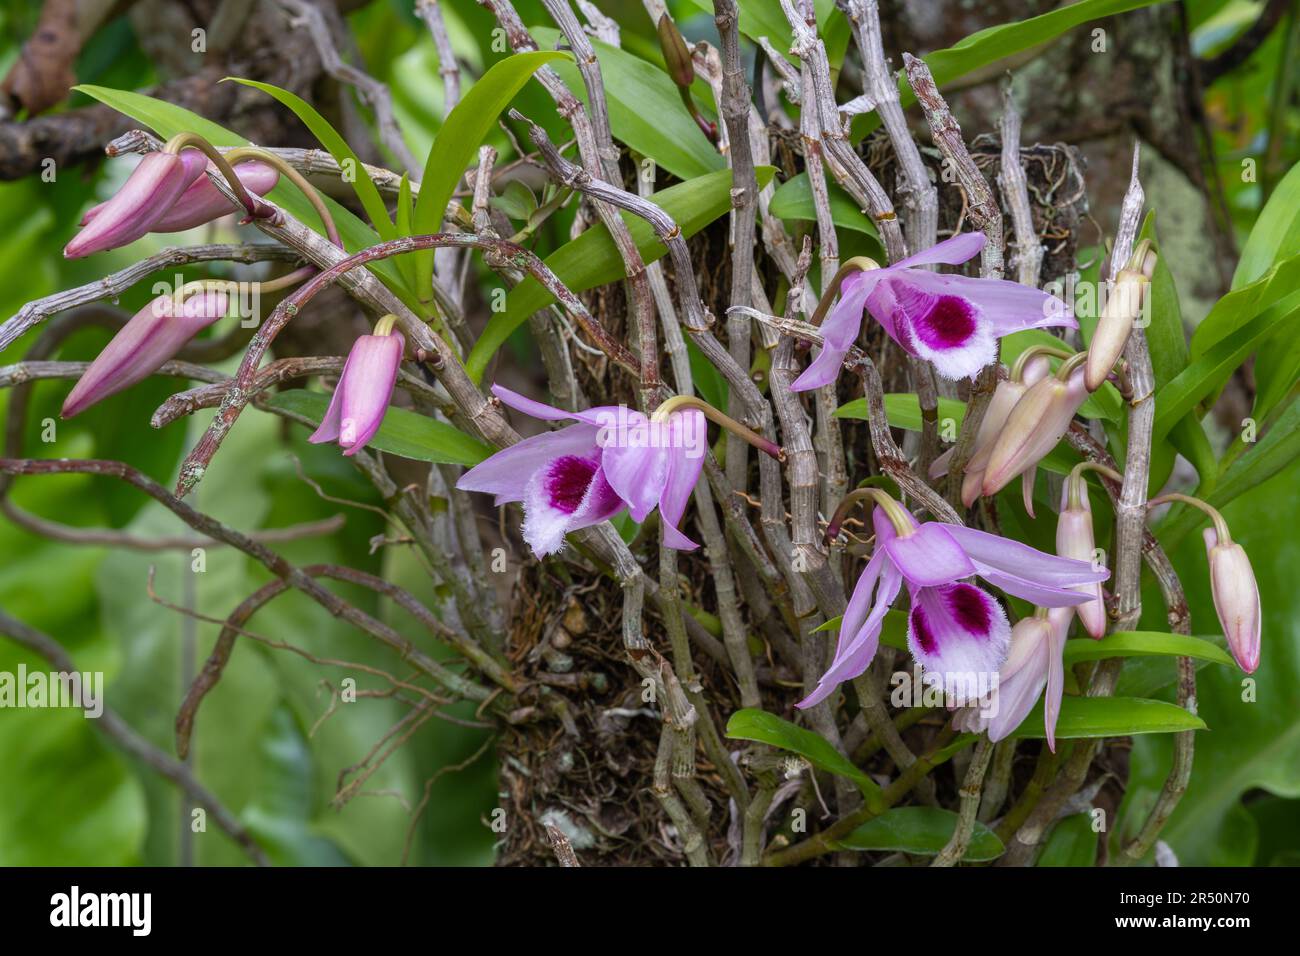 Closeup view of colorful purple and pink flowers and buds of dendrobium anosmum epiphytic orchid species outdoors in tropical garden Stock Photo